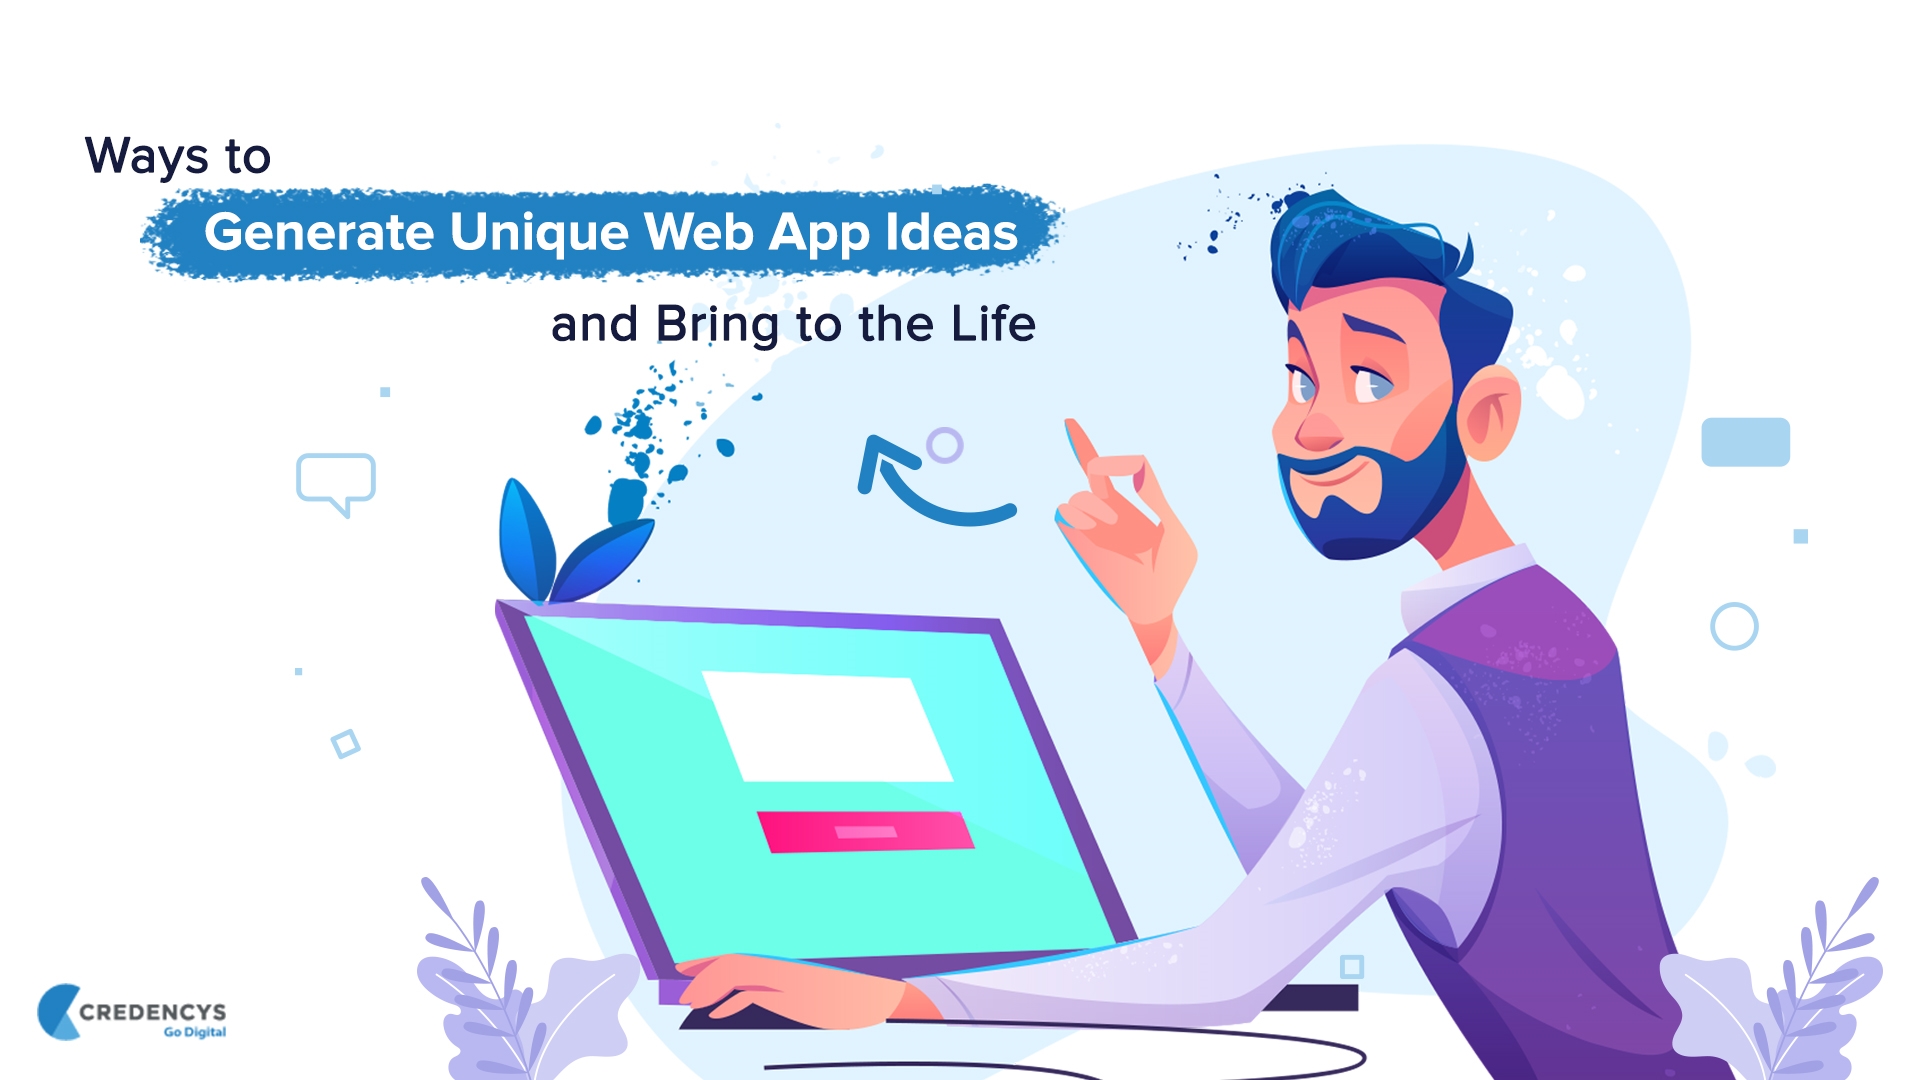 7 Ways to Generate Unique Web App Ideas for Your Startup to Consider | DeviceDaily.com